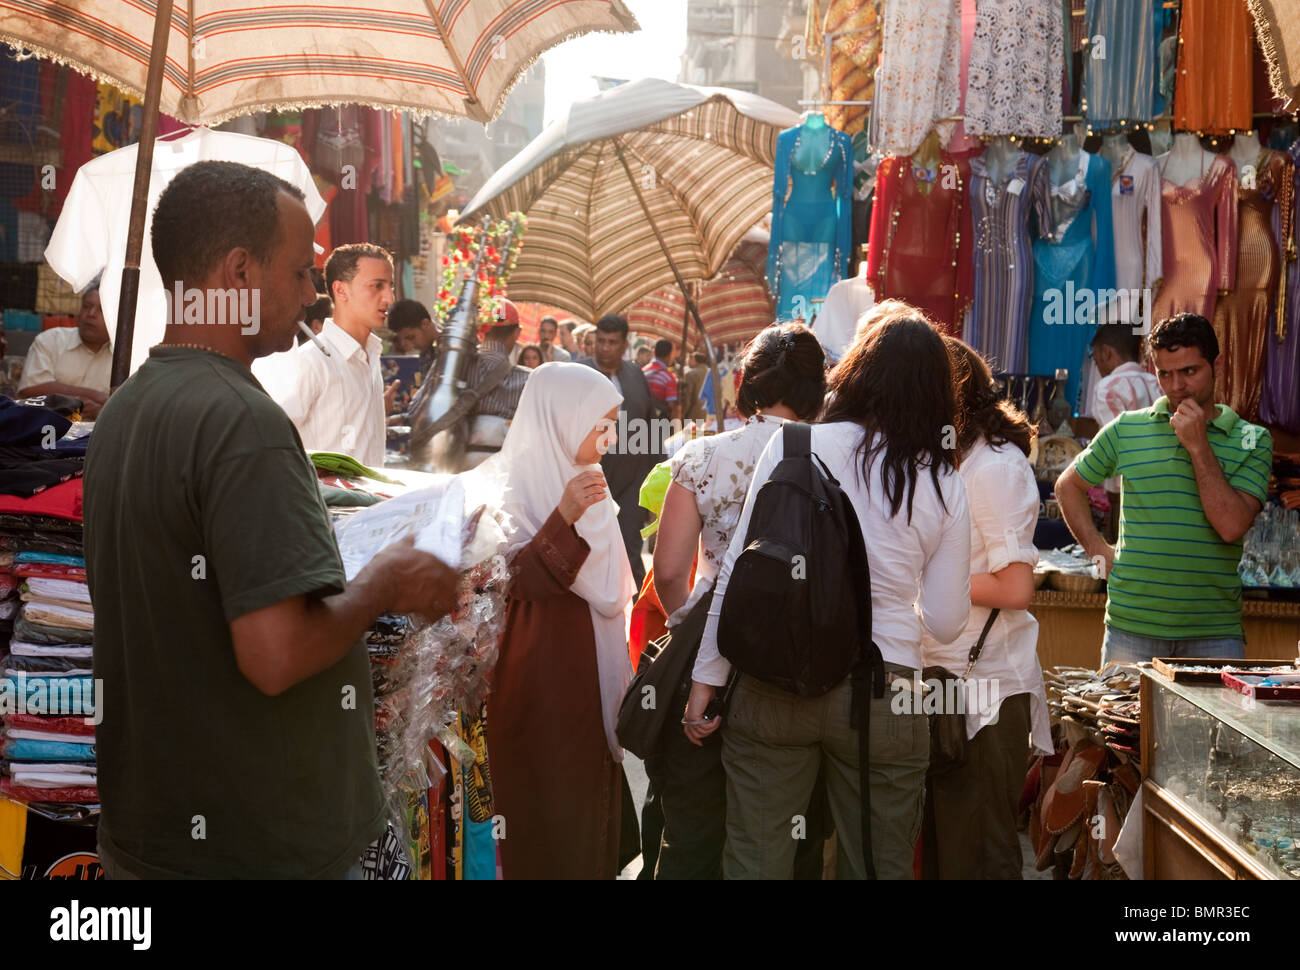 Market Cairo; Western tourists shopping with local people in the crowded Khan el Khalili market stalls, Islamic quarter, Cairo, Egypt North Africa Stock Photo